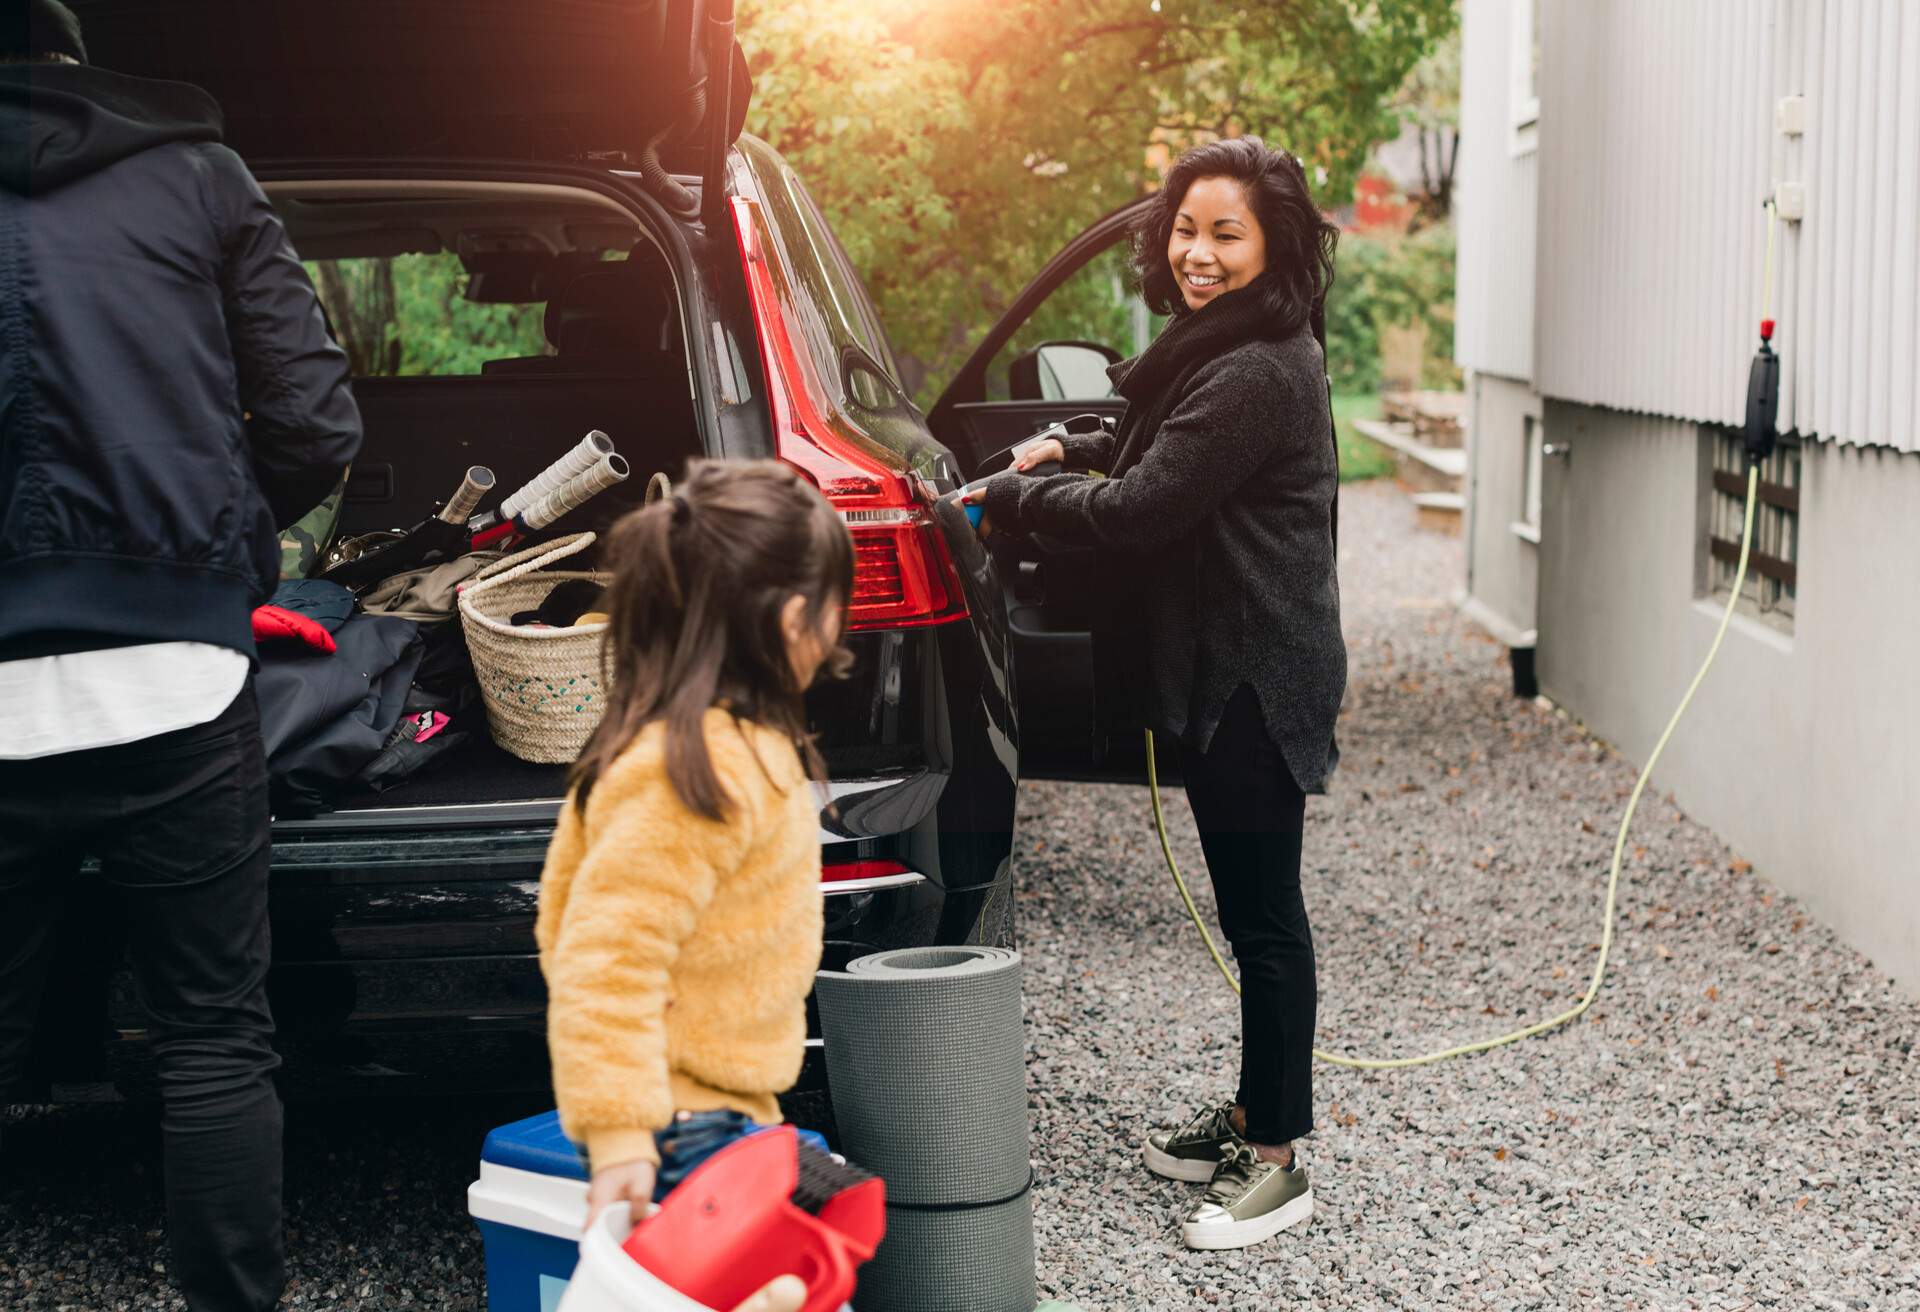 Smiling woman charging car while family loading luggage in trunk